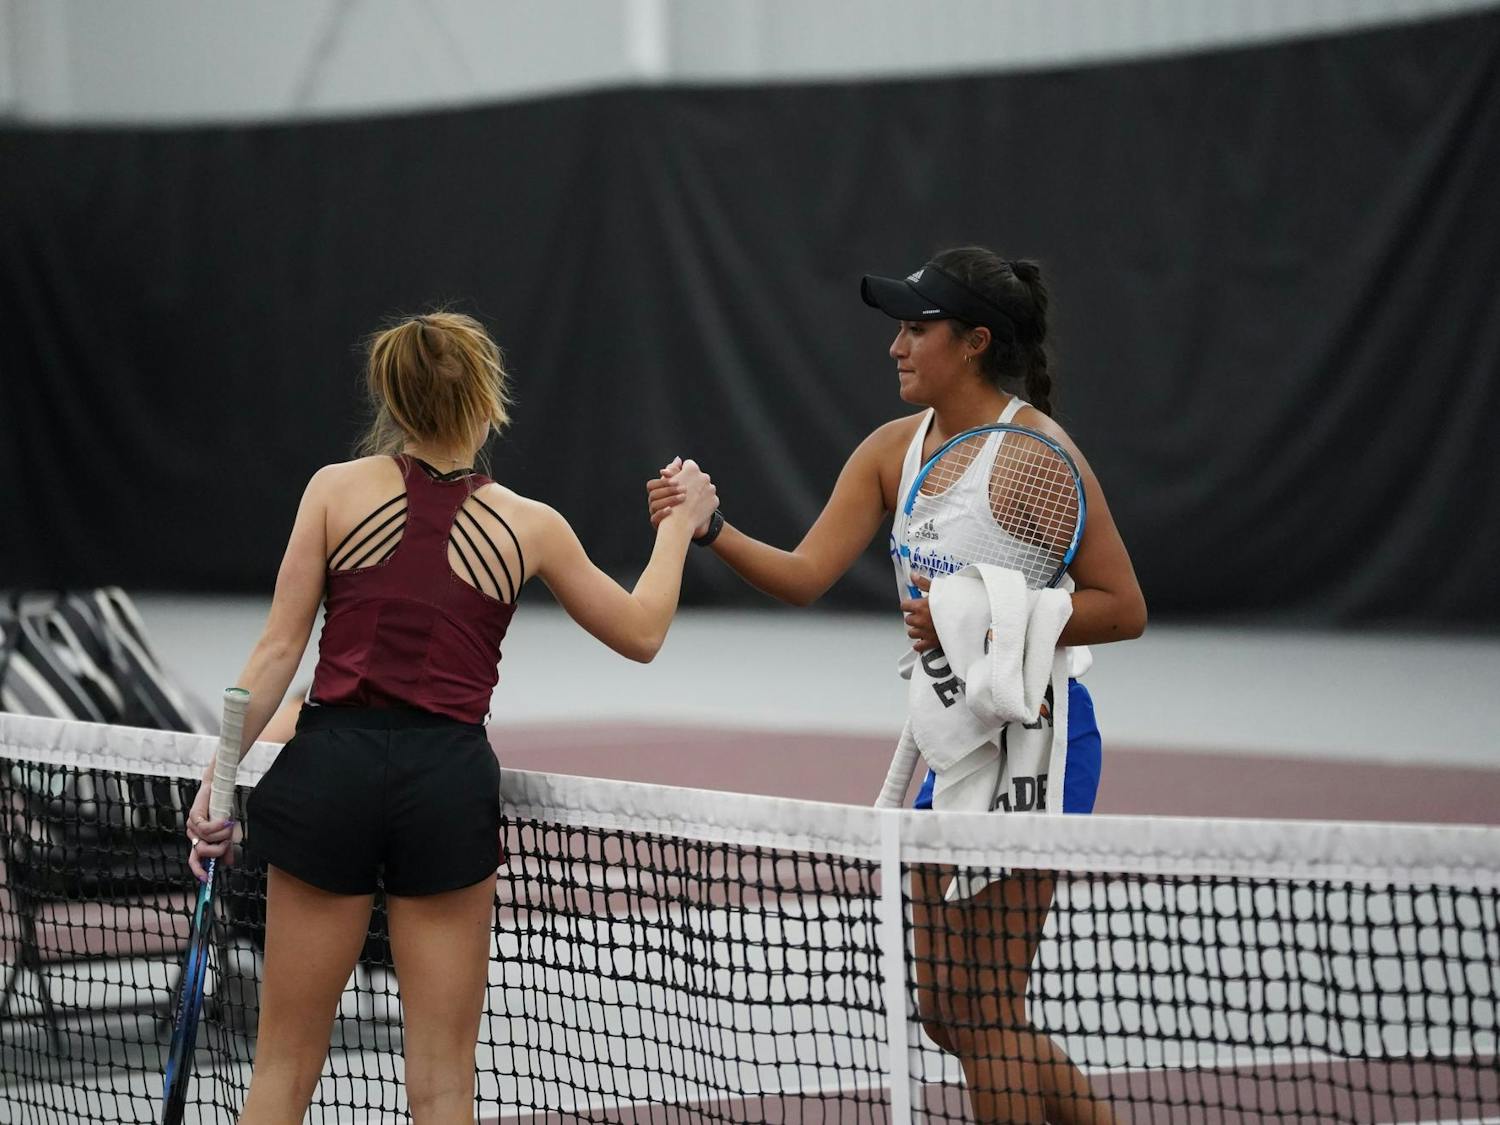 Junior Sarah Hammer meets her opponent at the net to conclude their singles match on Jan. 21, 2024. The Gamecocks went on to defeat the Blue Hoses 4-0.